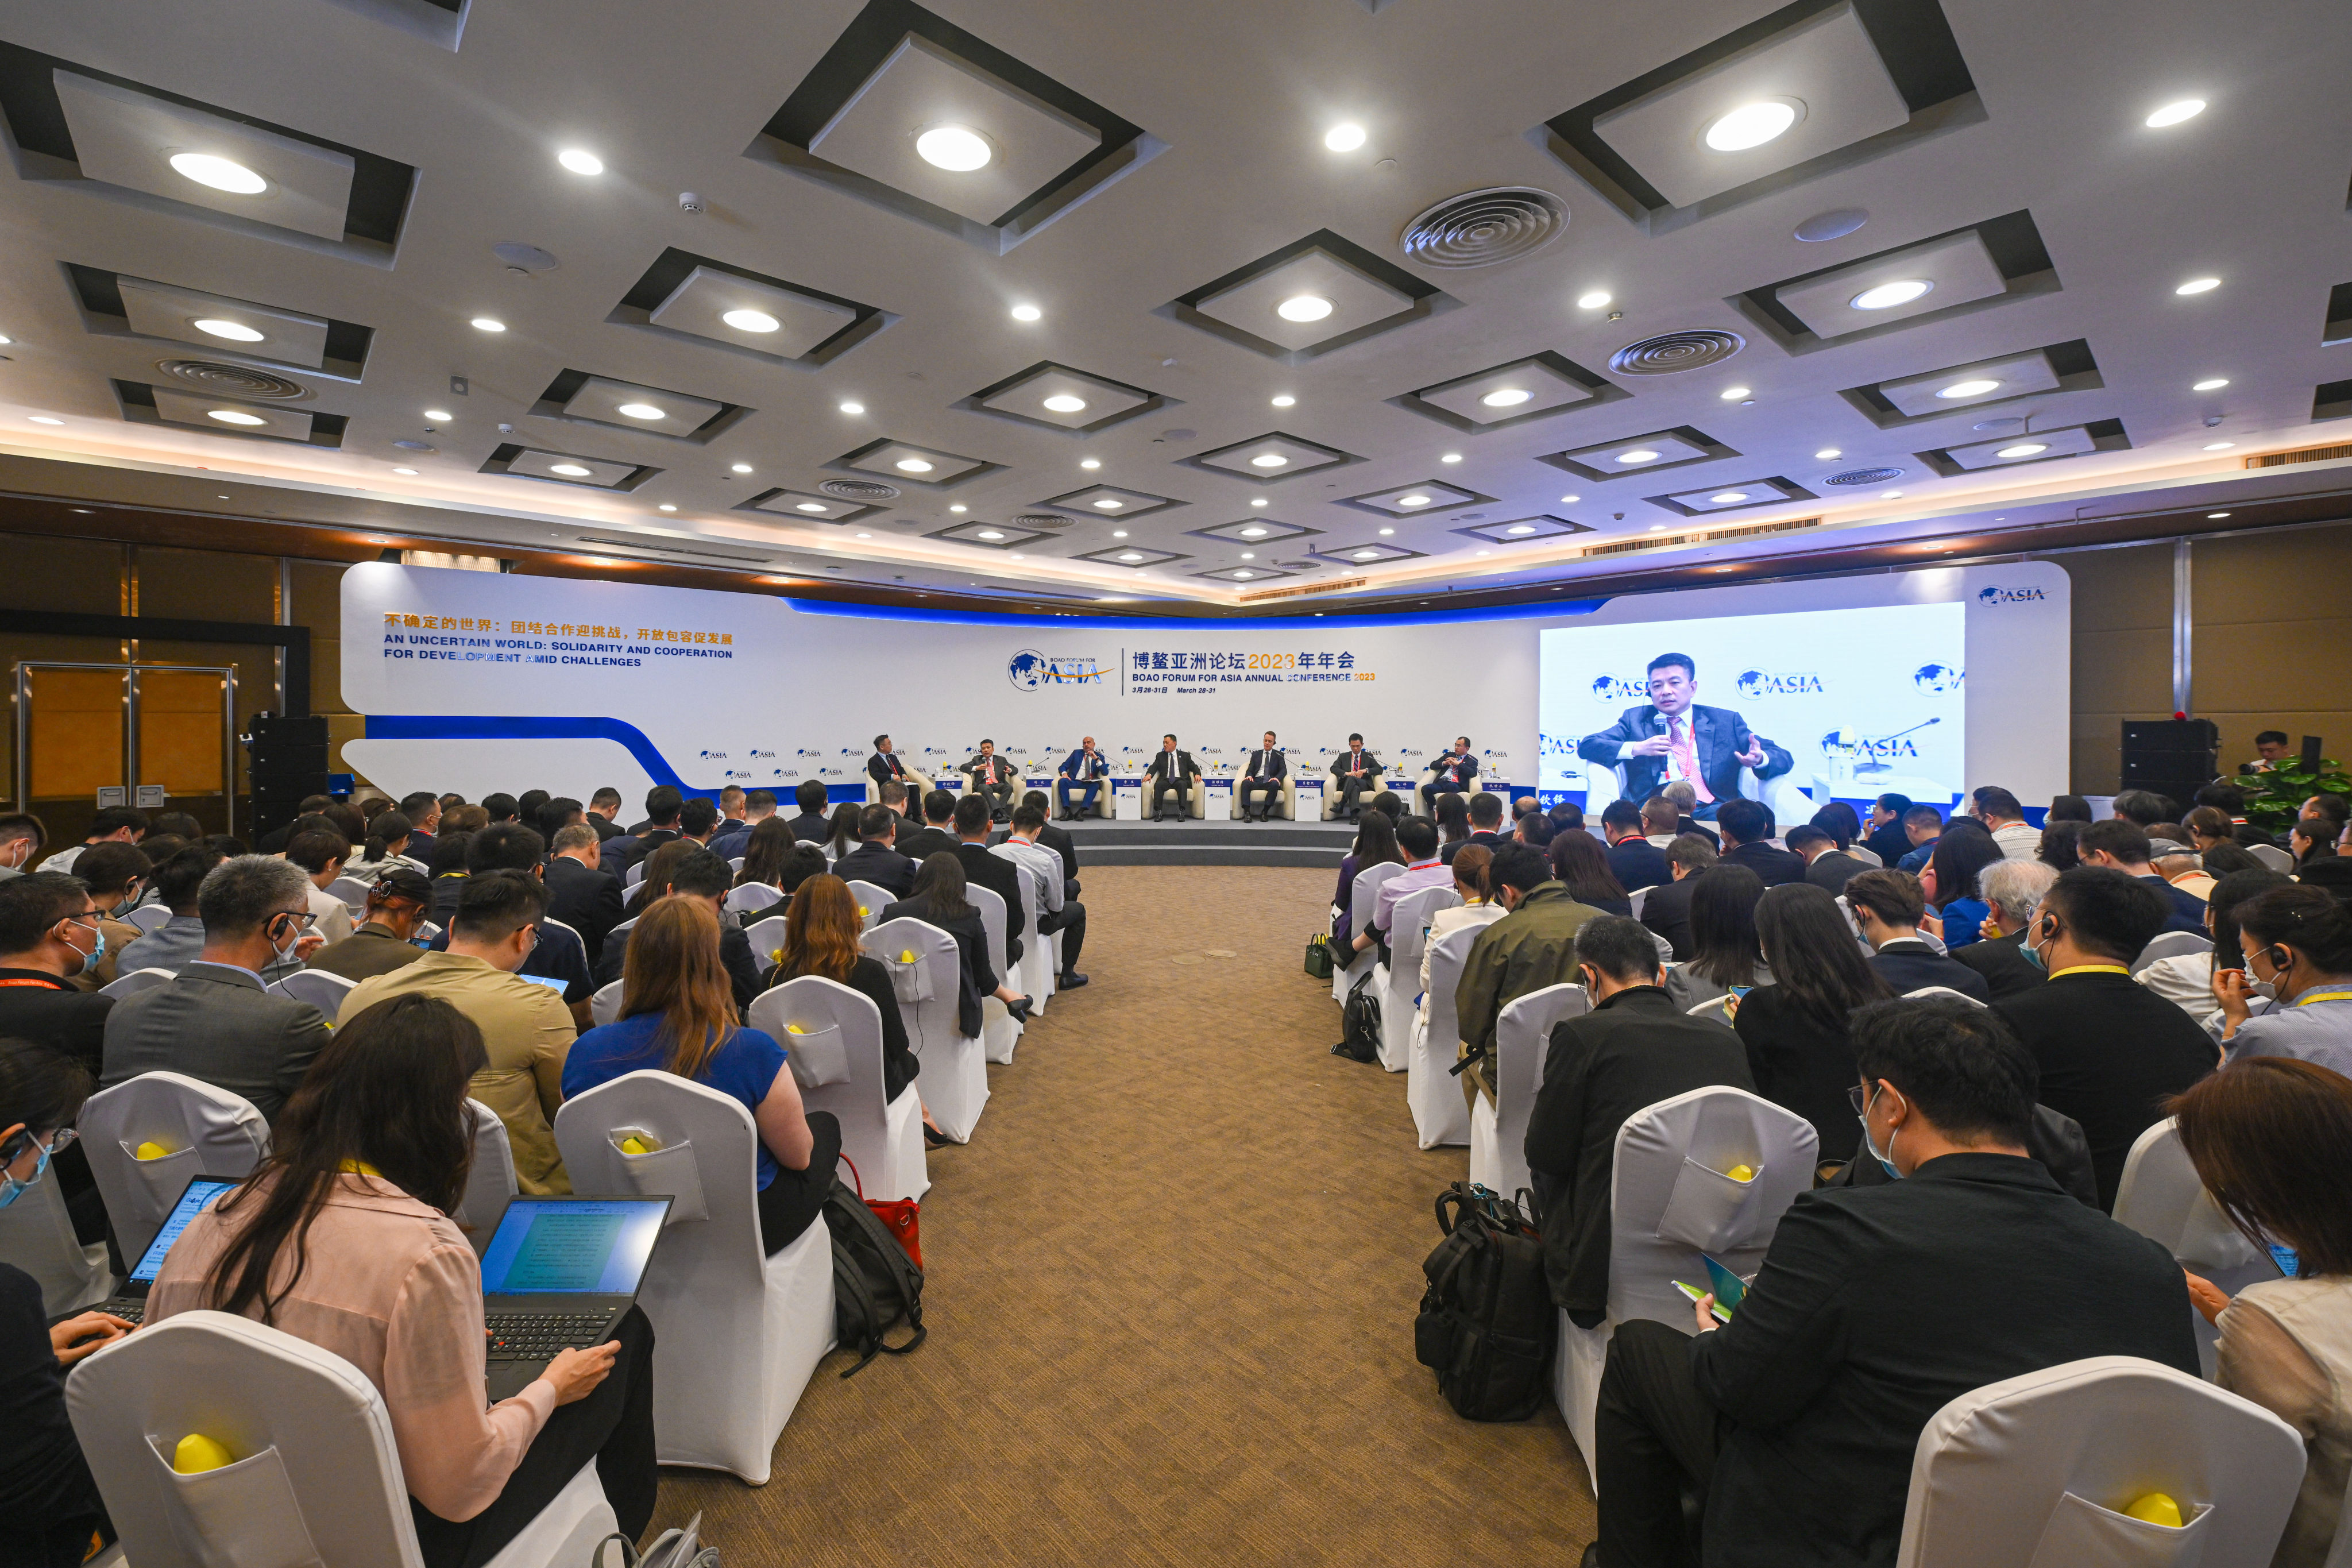 A panel discussion themed on “New Landscape of Industrial and Supply Chain” is held during the Boao Forum for Asia Annual Conference 2023 in Boao, south China’s Hainan Province. Photo: Xinhua